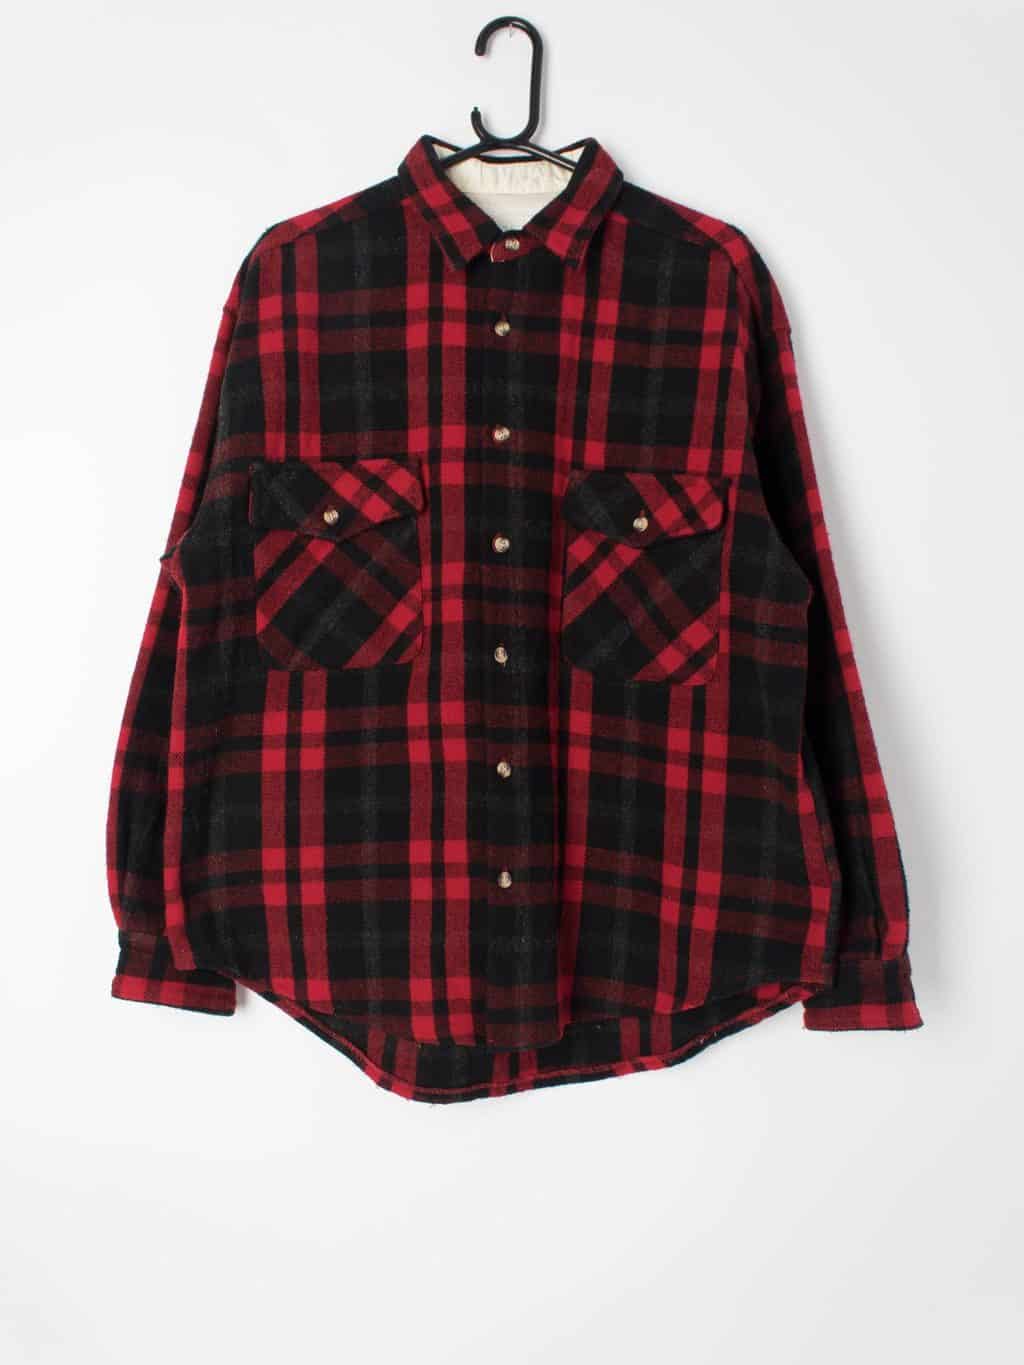 Mens vintage thick plaid shirt heavy weight red and black flannel - Medium  / Large